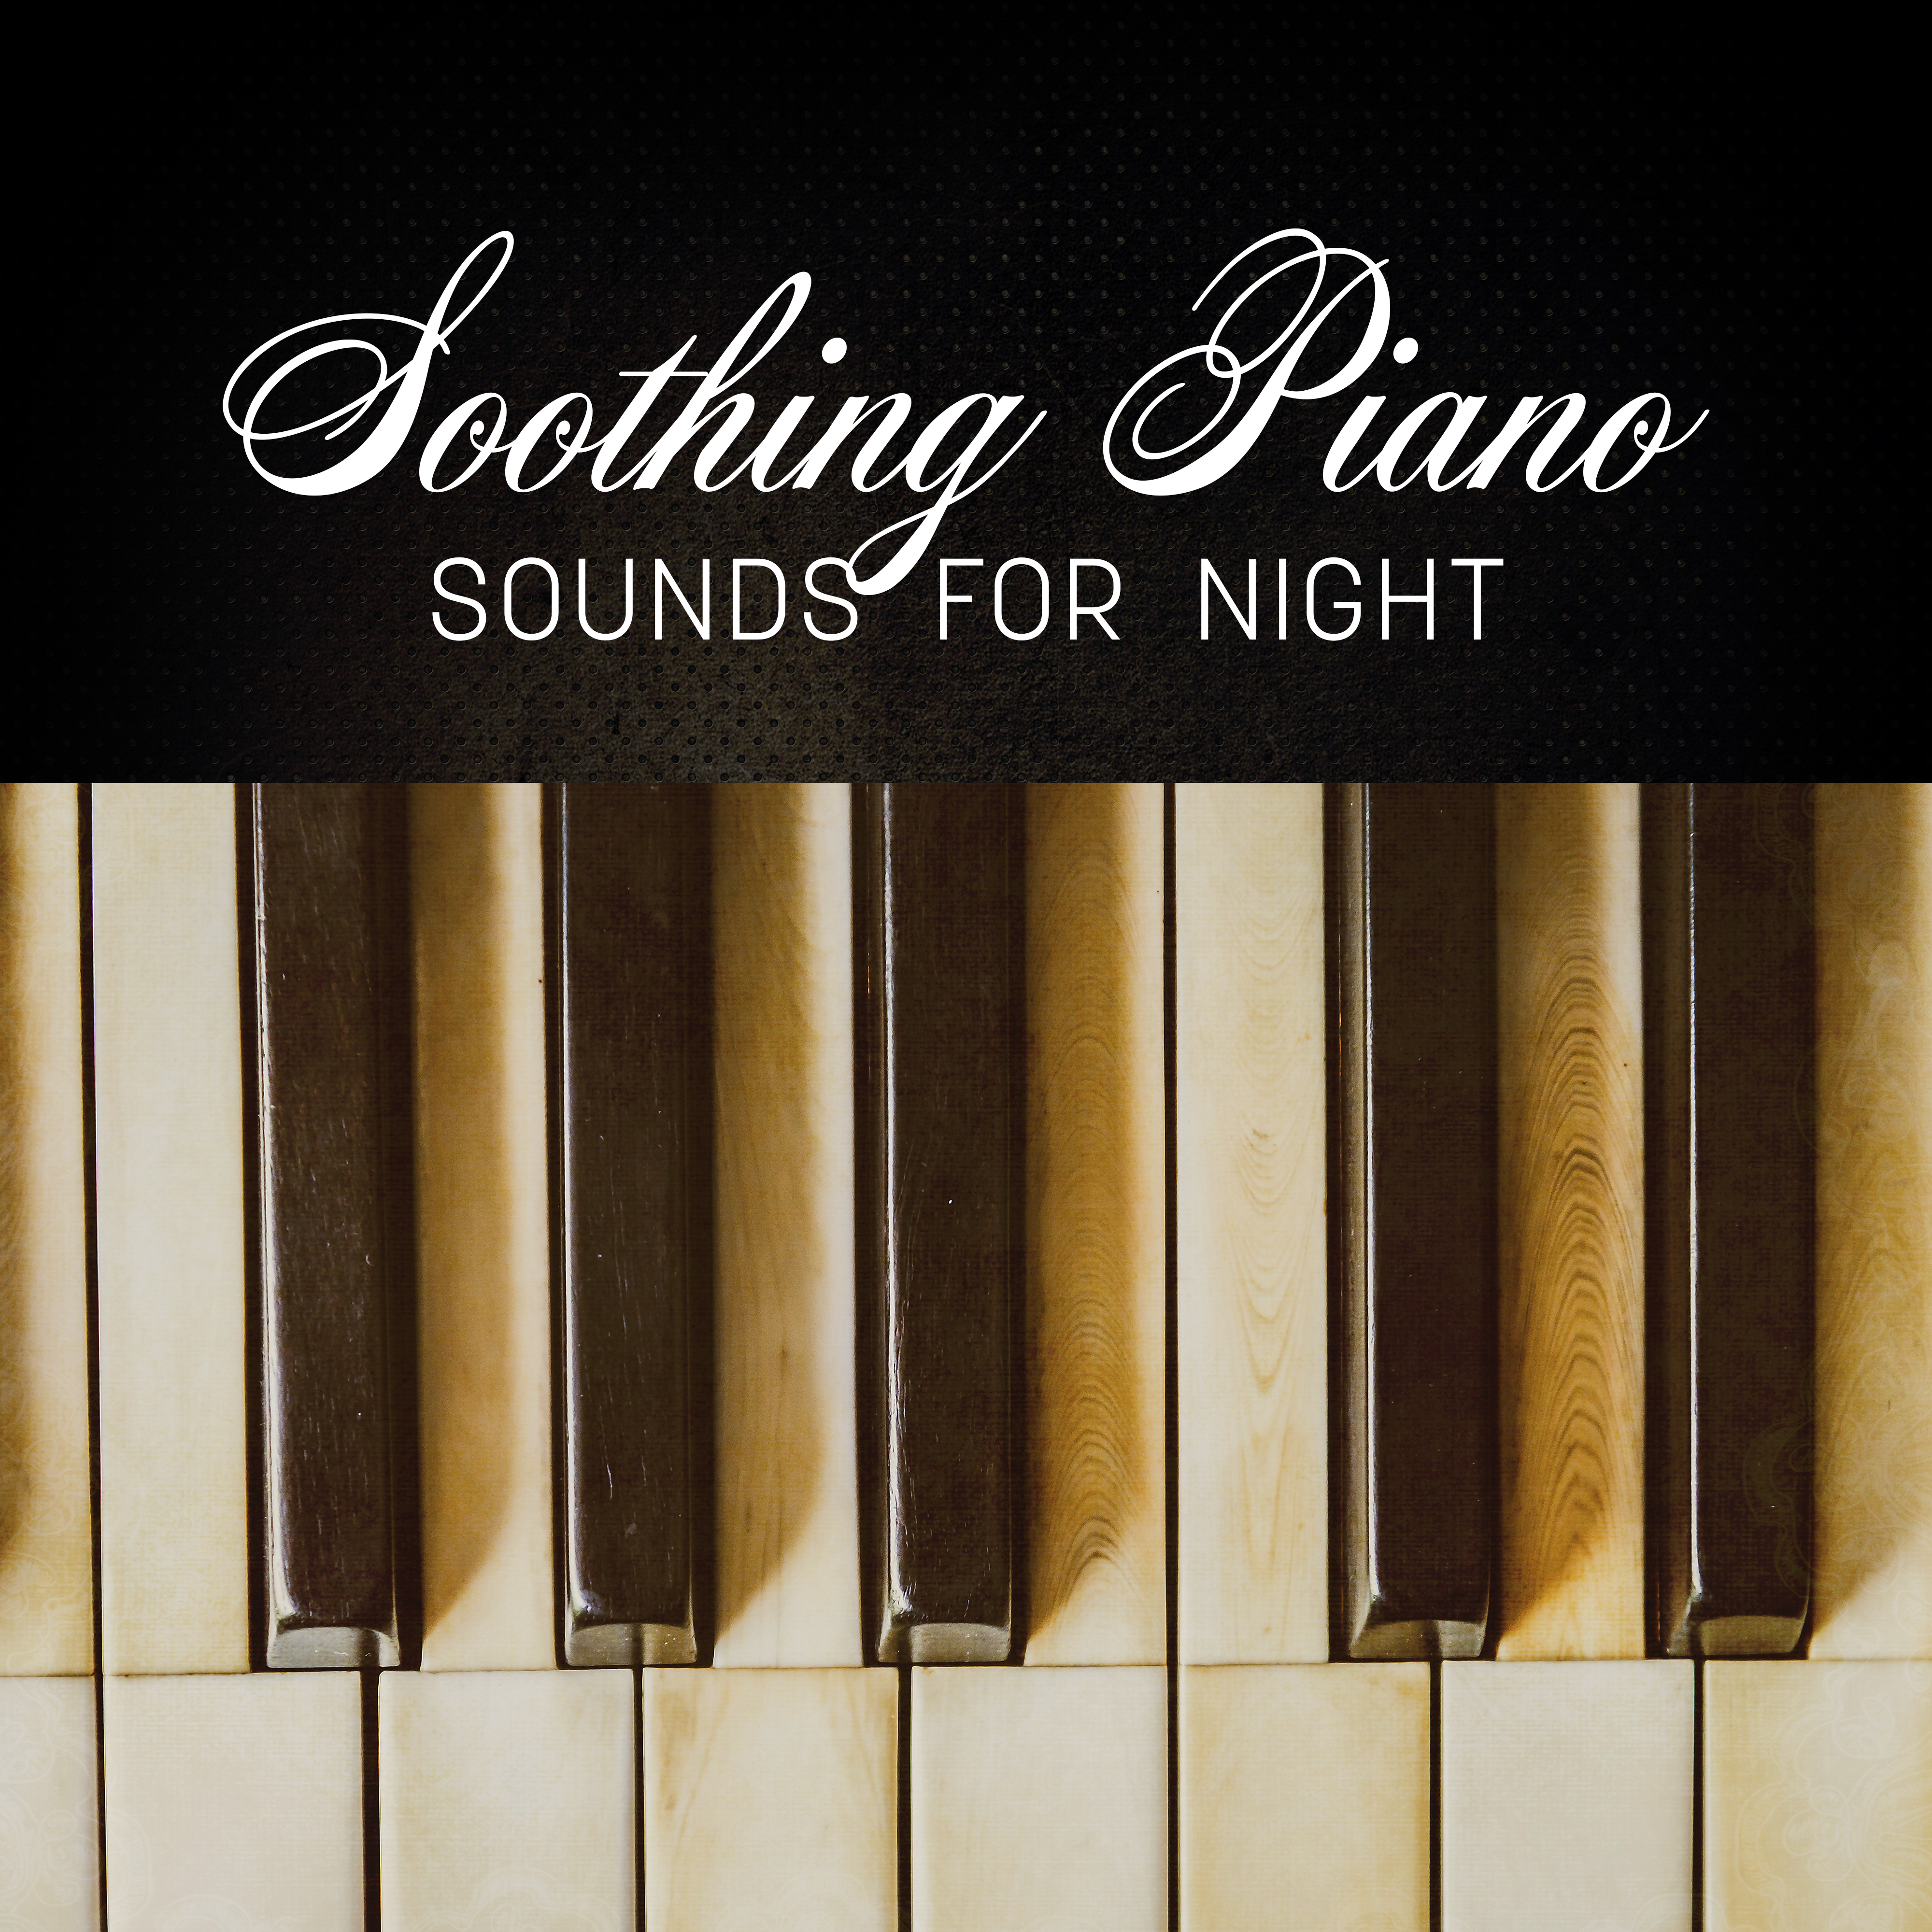 Soothing Piano Sounds for Night